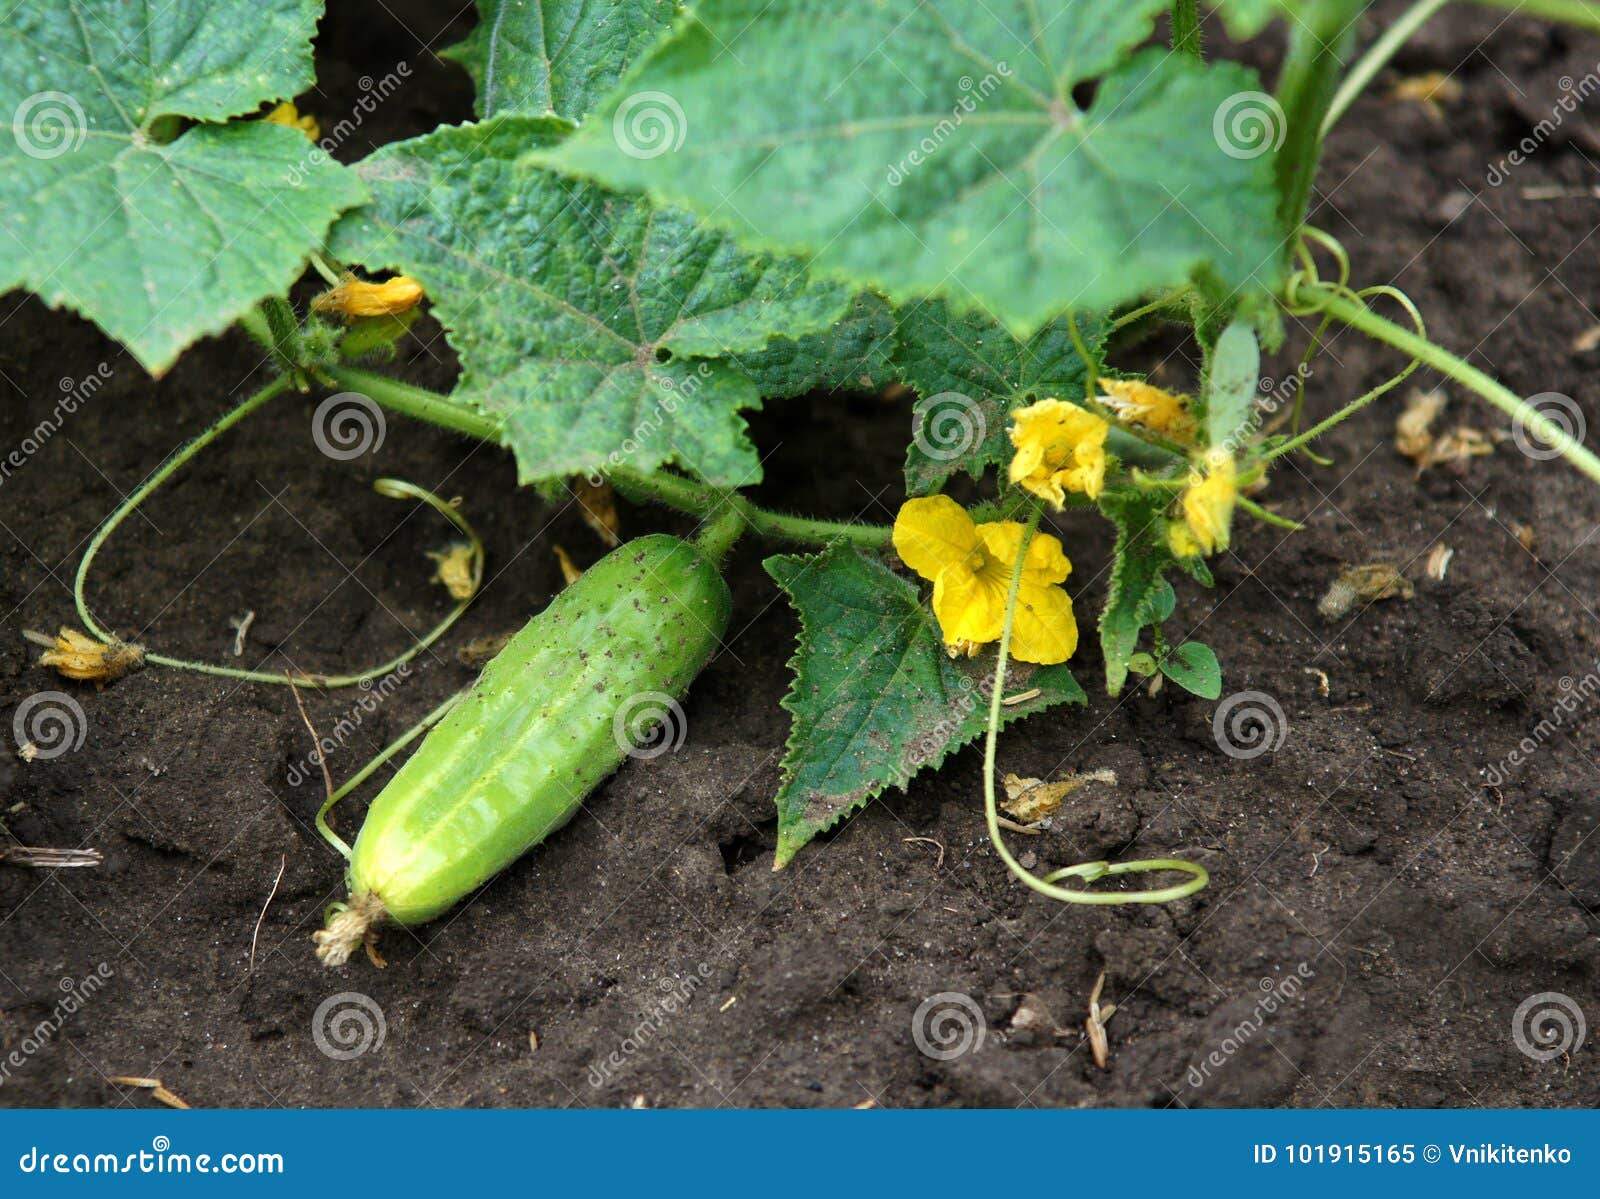 82,043 Cucumber Plant Stock - Free & Royalty-Free Photos from Dreamstime